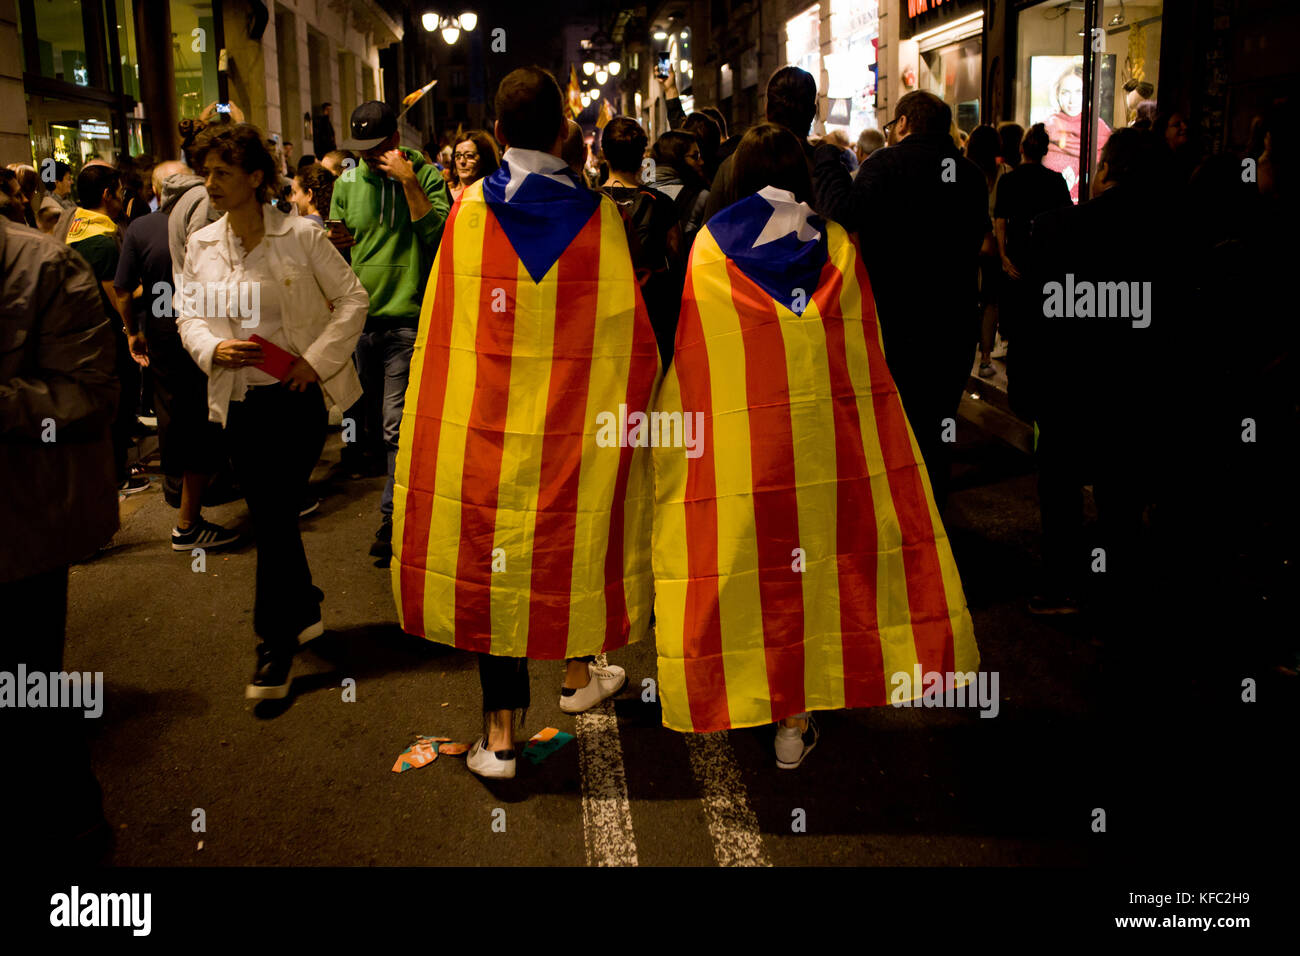 Barcelona, Spain. 27th Oct, 2017. October 27, 2017. A couple wrapped with estelada or pro-independence flags is seen walking in the Gothic Quarter of Barcelona.  Catalonia's parliament voted to declare independence from Spain and proclaim a republic, just as Madrid is poised to impose direct rule on the region to stop it in its tracks. Credit:  Jordi Boixareu/Alamy Live News Stock Photo